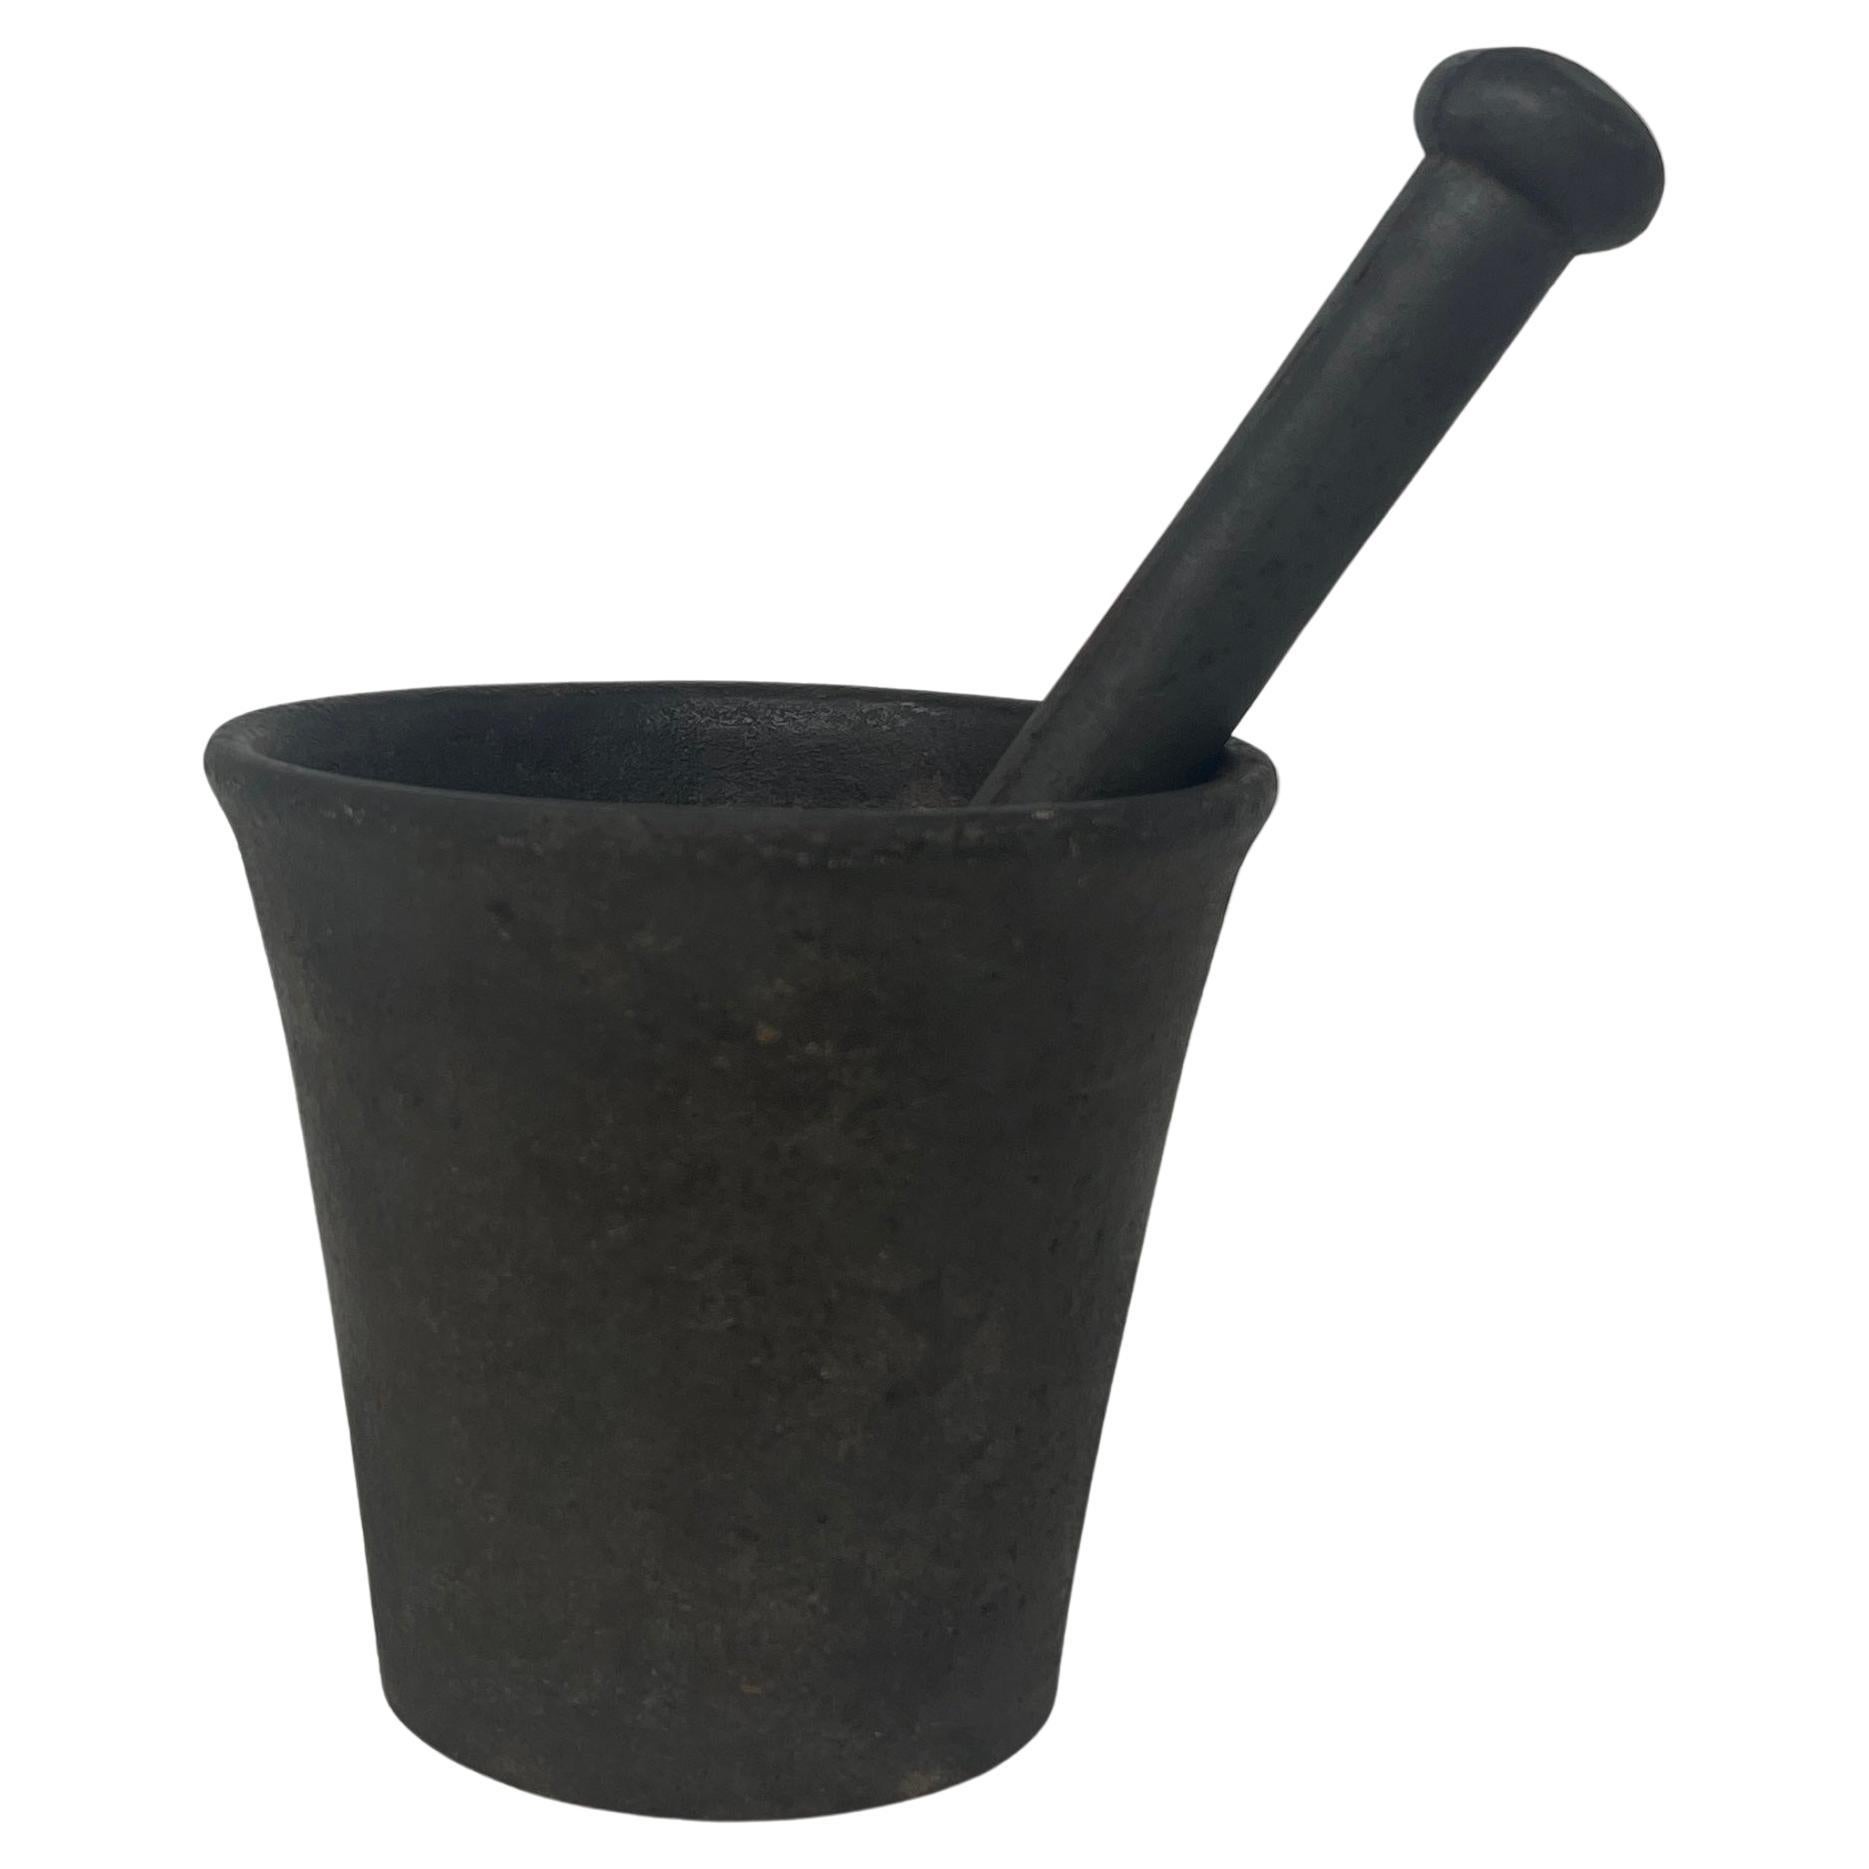 Large Estate Solid Iron Mortar And Pestle, Circa 1930's-1940's. For Sale